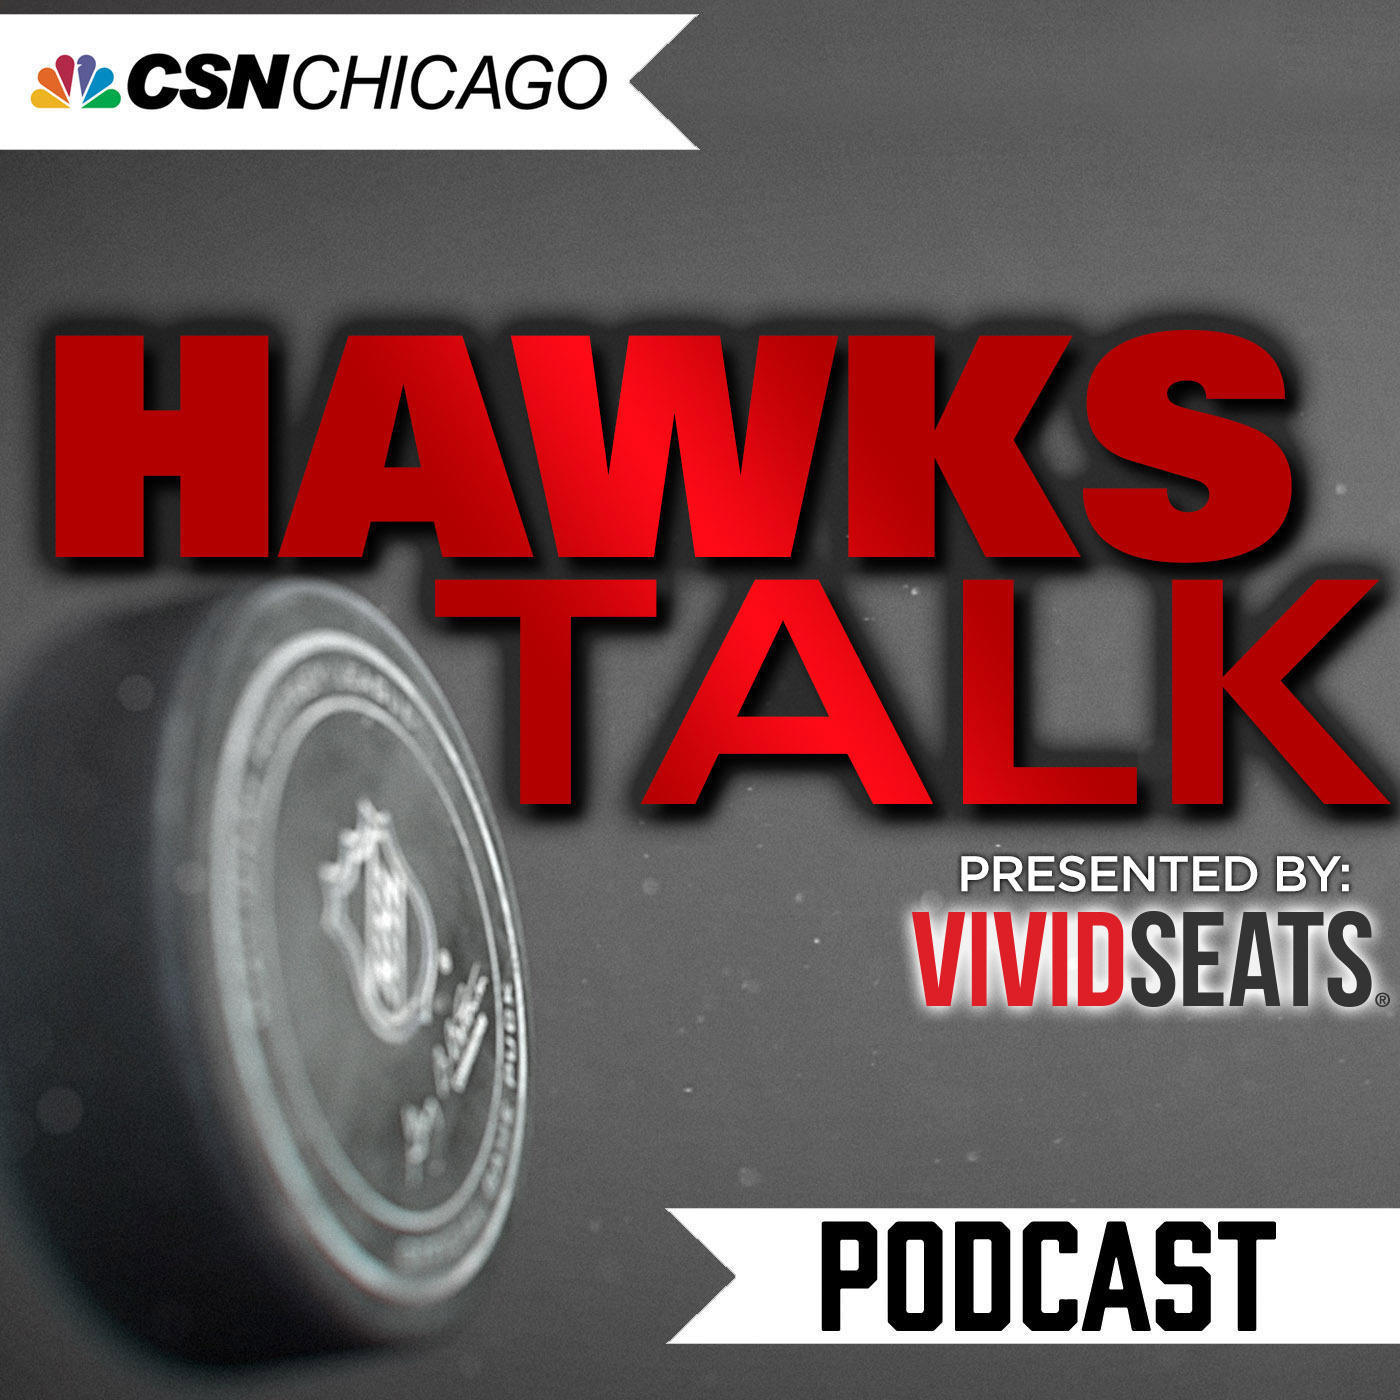 Ep. 39: Bickell on his journey to the Blackhawks, 17 seconds, and when his MS symptoms began